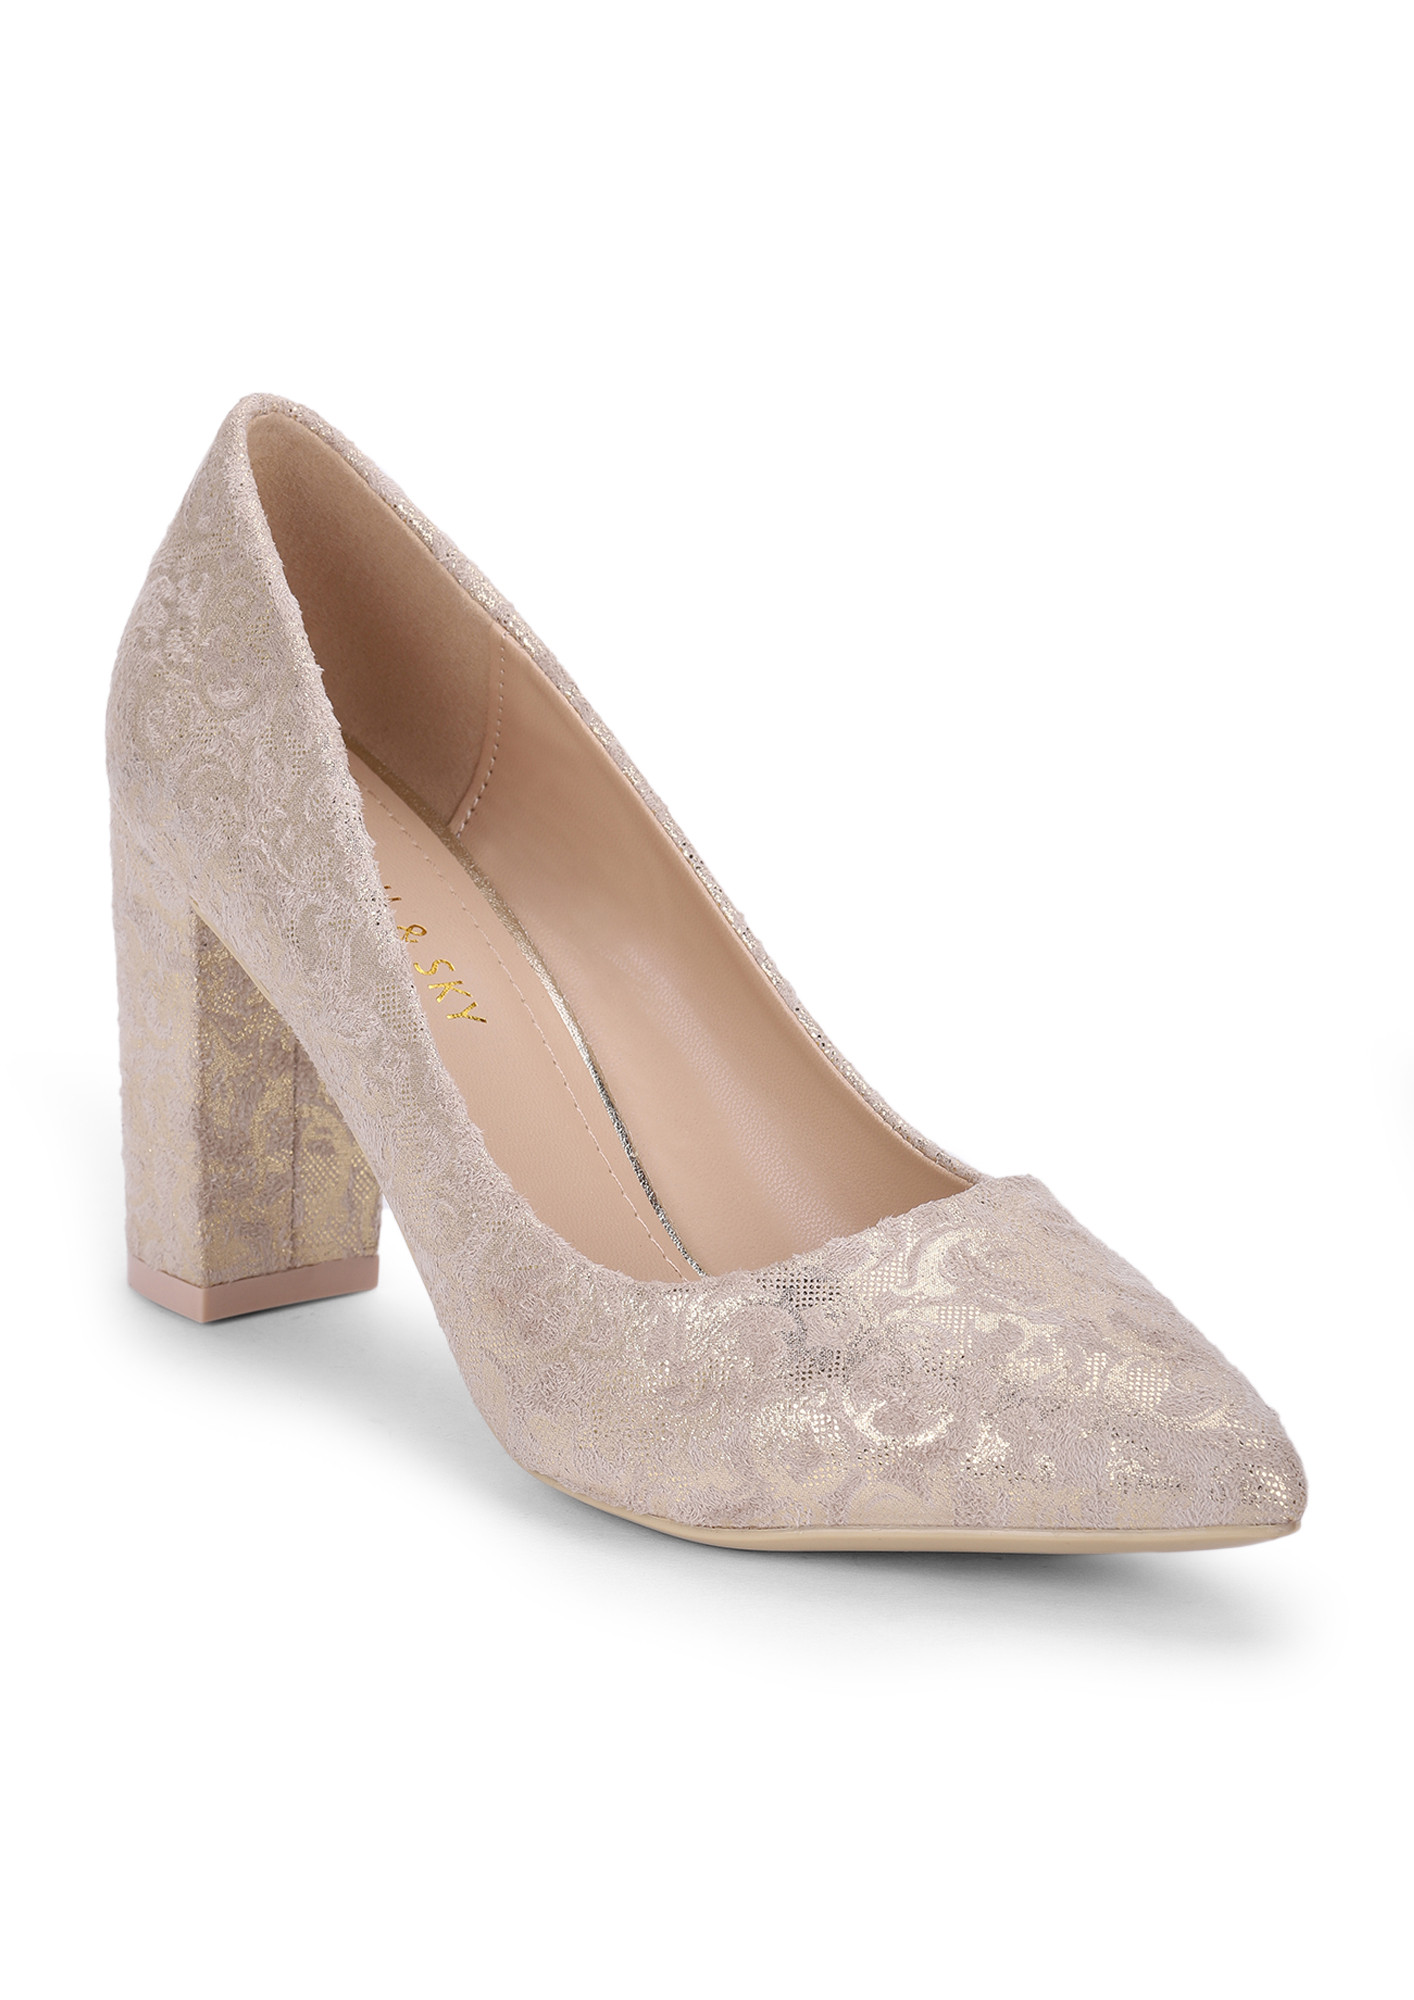 THE ROYAL WITHIN YOU APRICOT PUMPS